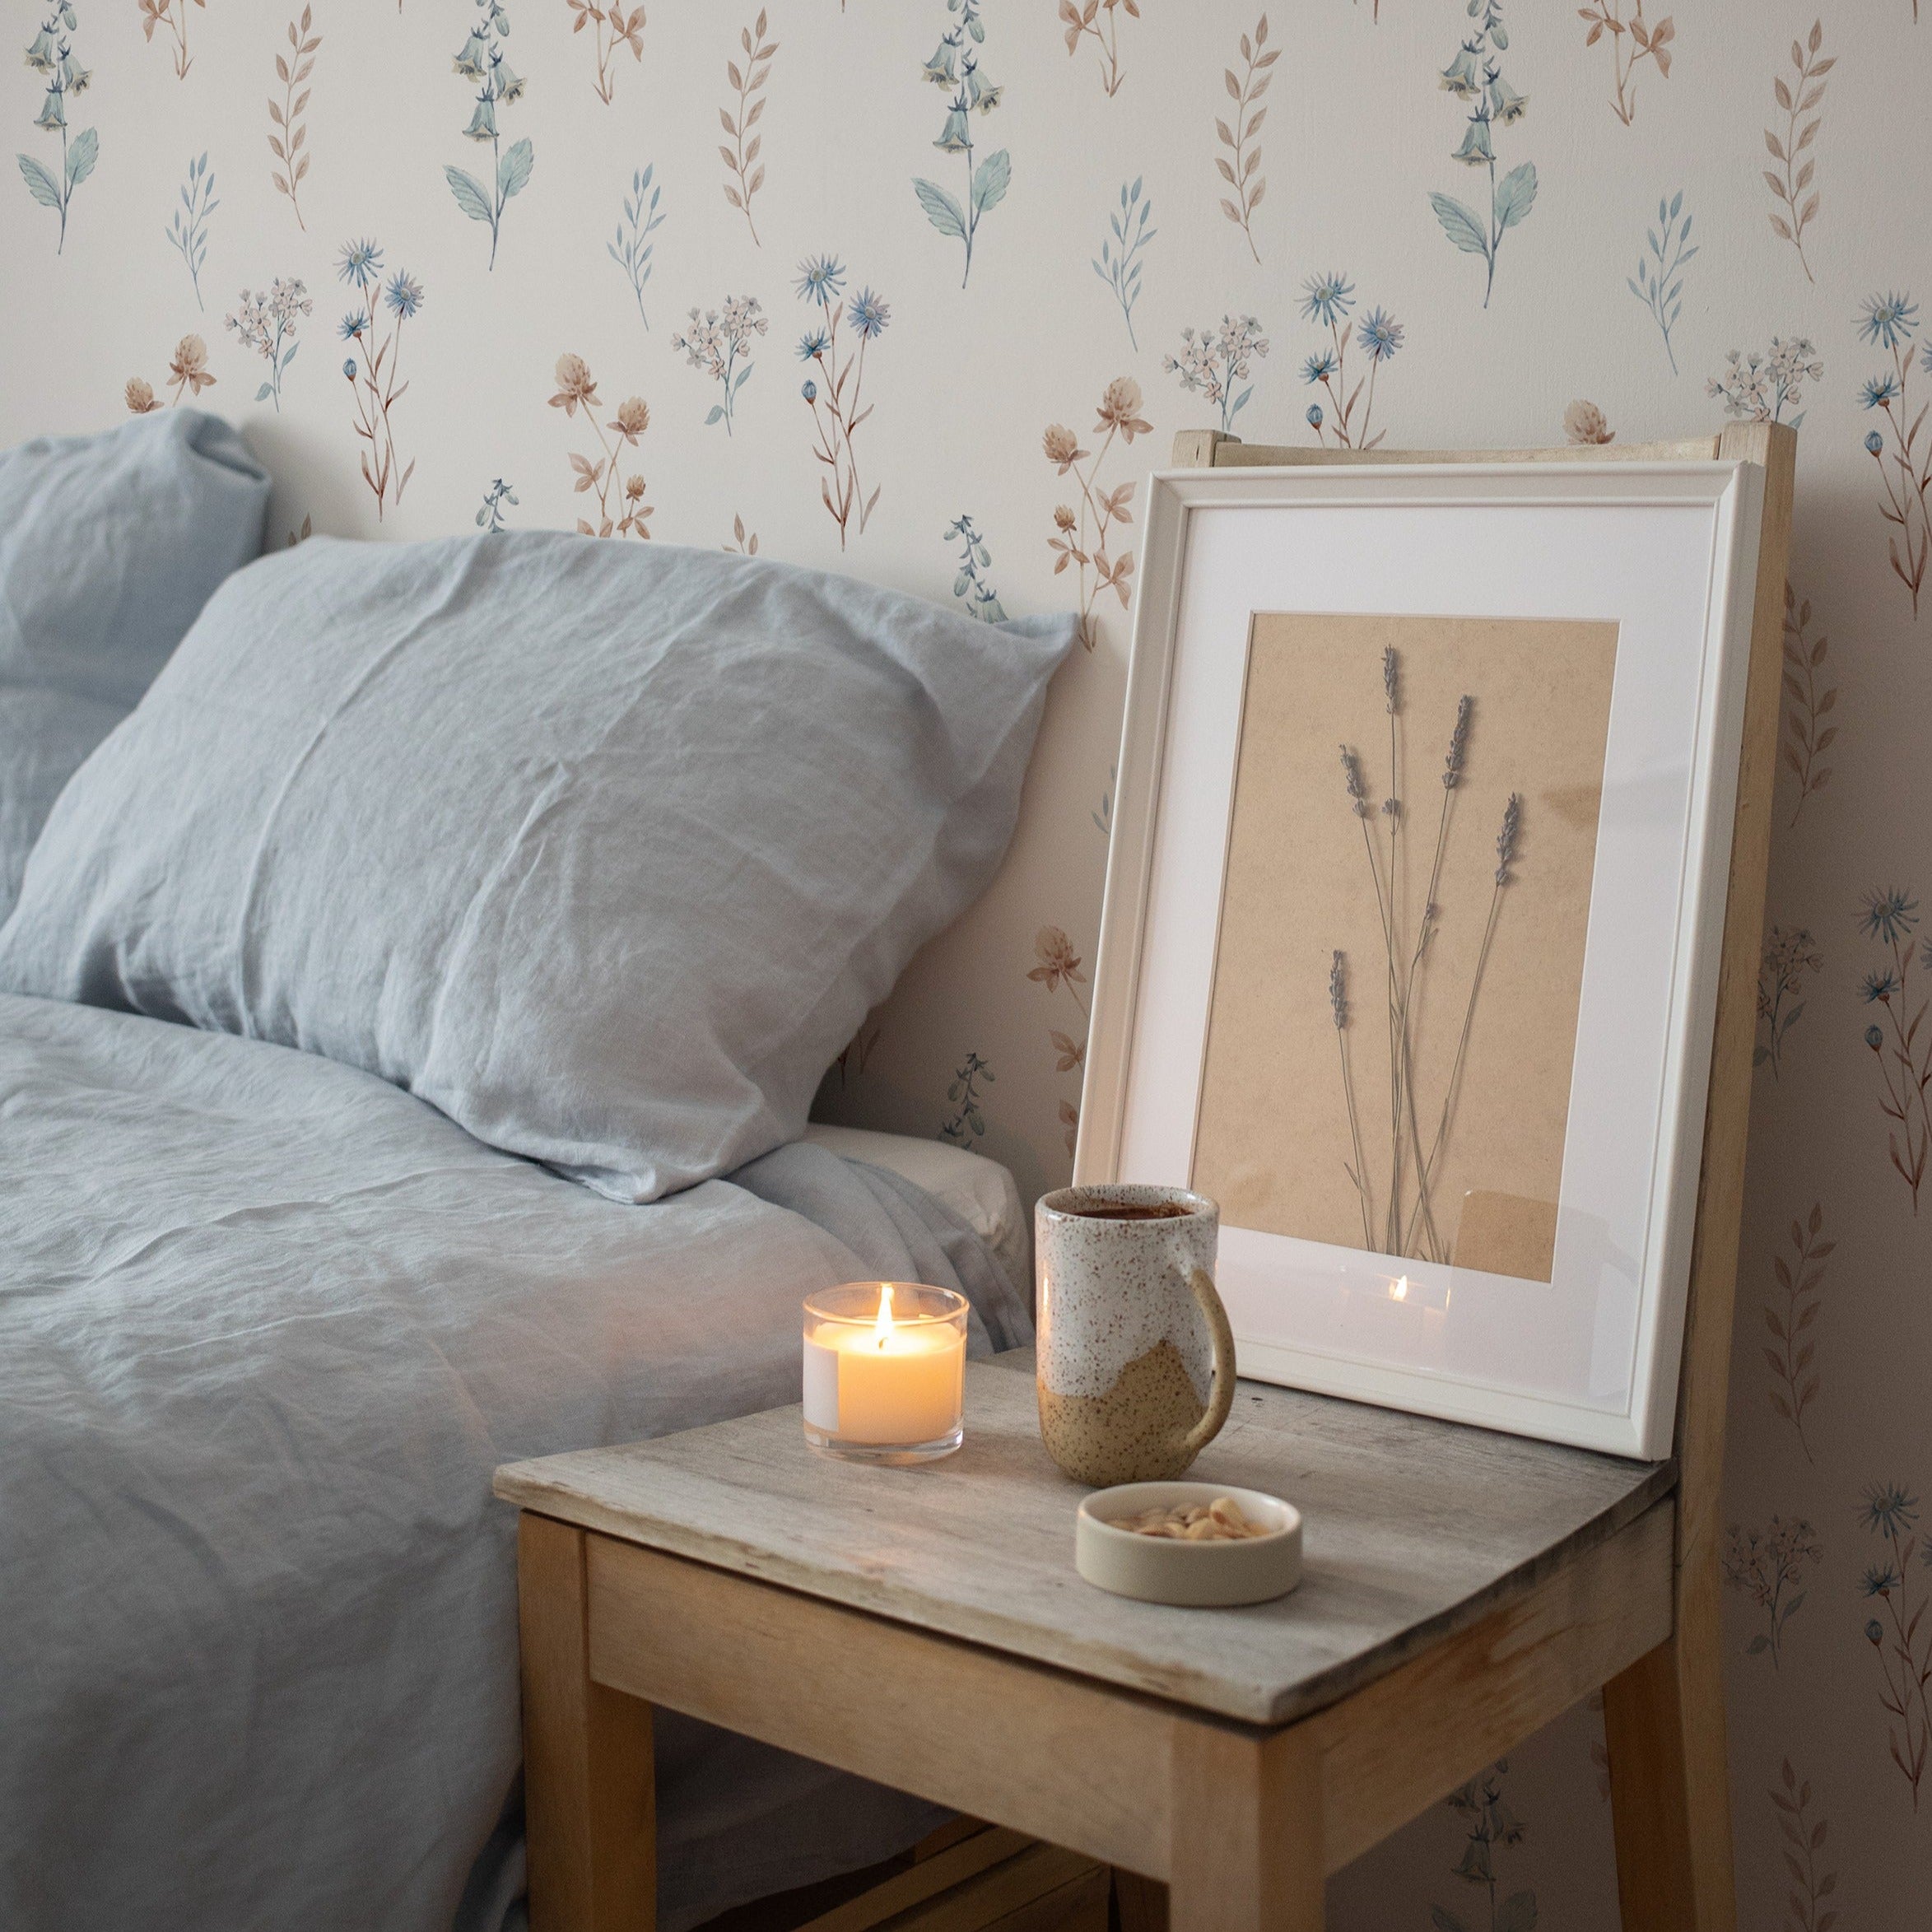 A bedroom setting showcasing the Bluebell Floral Wallpaper as a backdrop. The décor includes a comfy bed with grey linens, a wooden bedside table with a framed picture, a ceramic mug, and a lit candle, creating a relaxing ambiance.